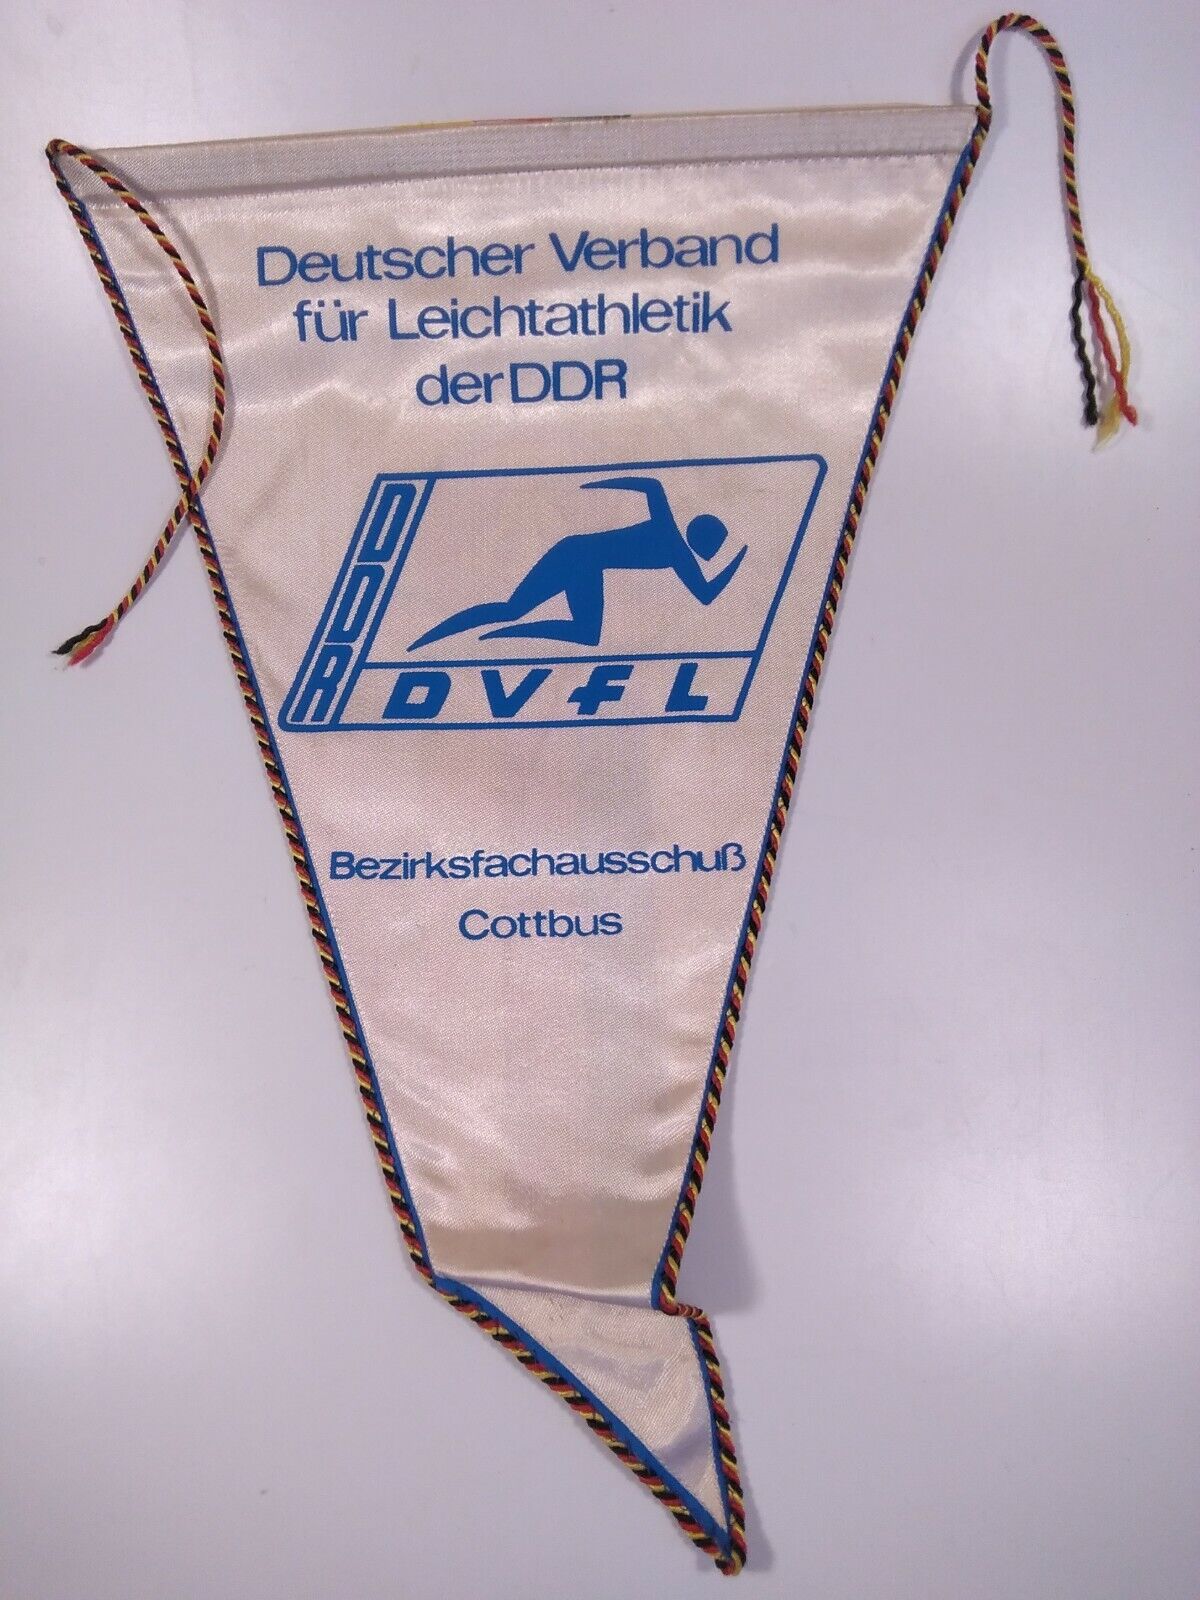 Vintage sports pennant.  Germany 1970s